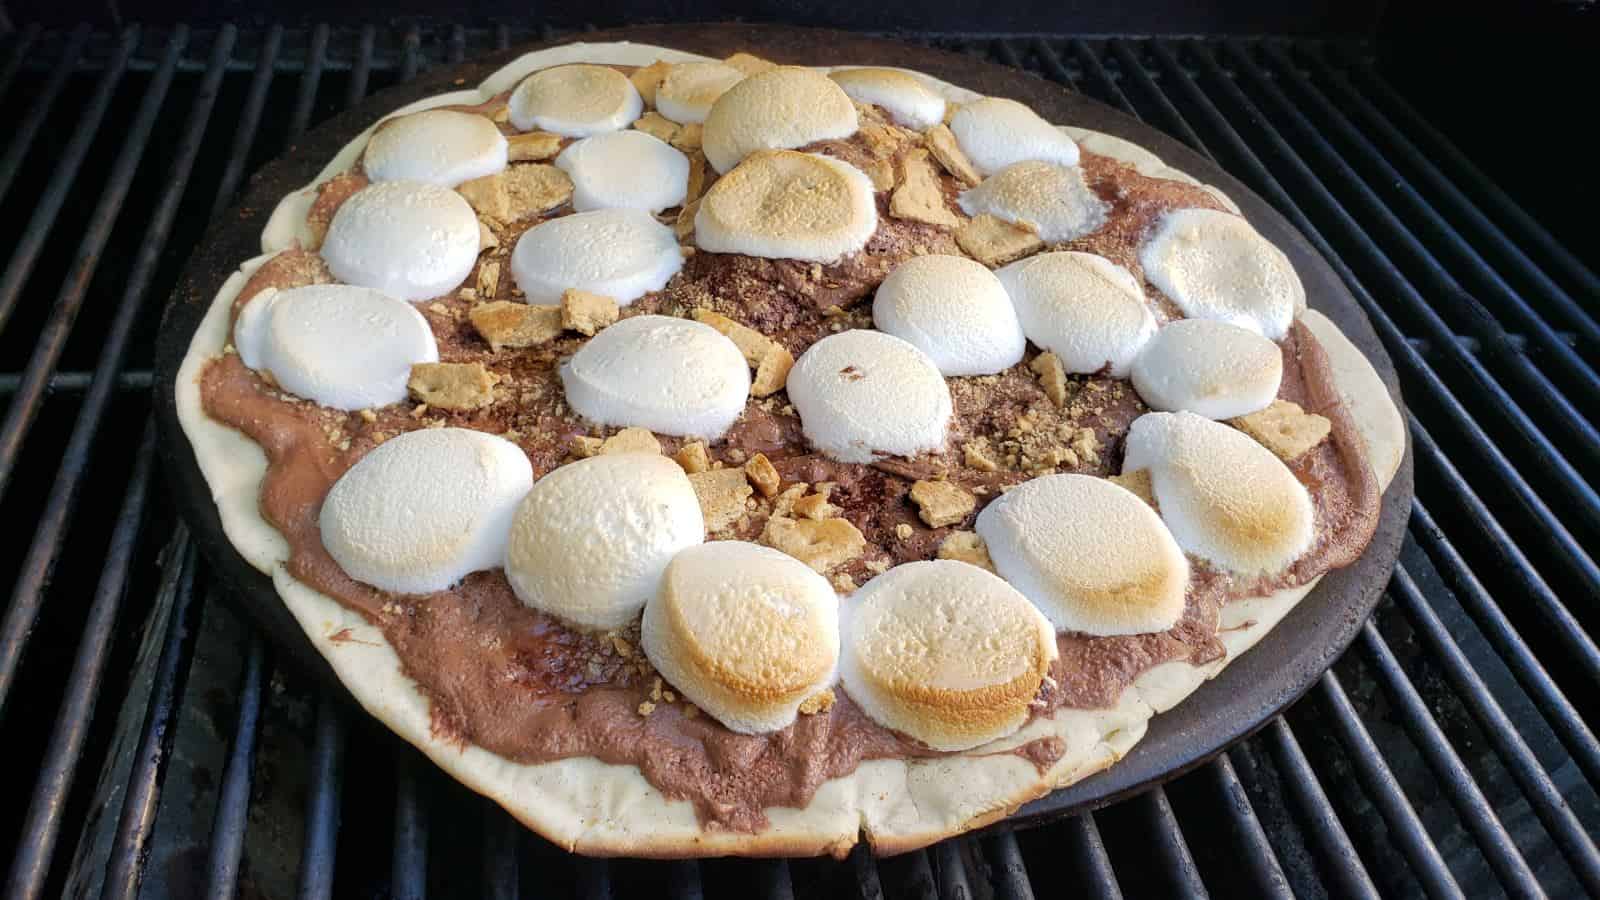 Image shows a grilled s'mores pizza on the grill.